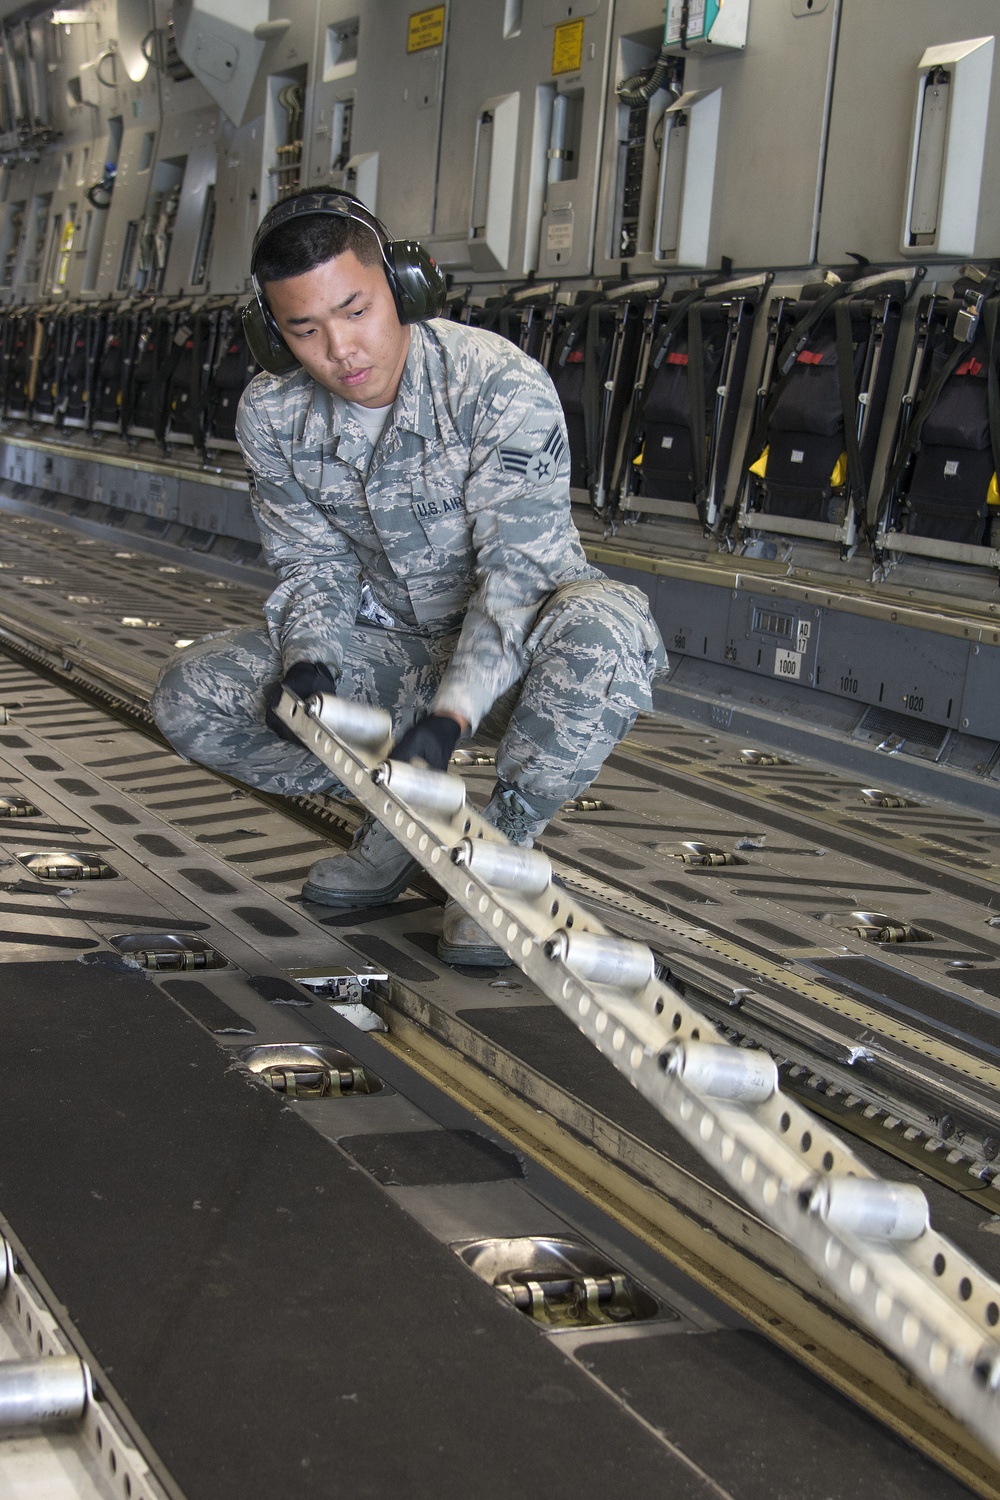 Port Dawgs secure equipment aboard C-17 aircraft